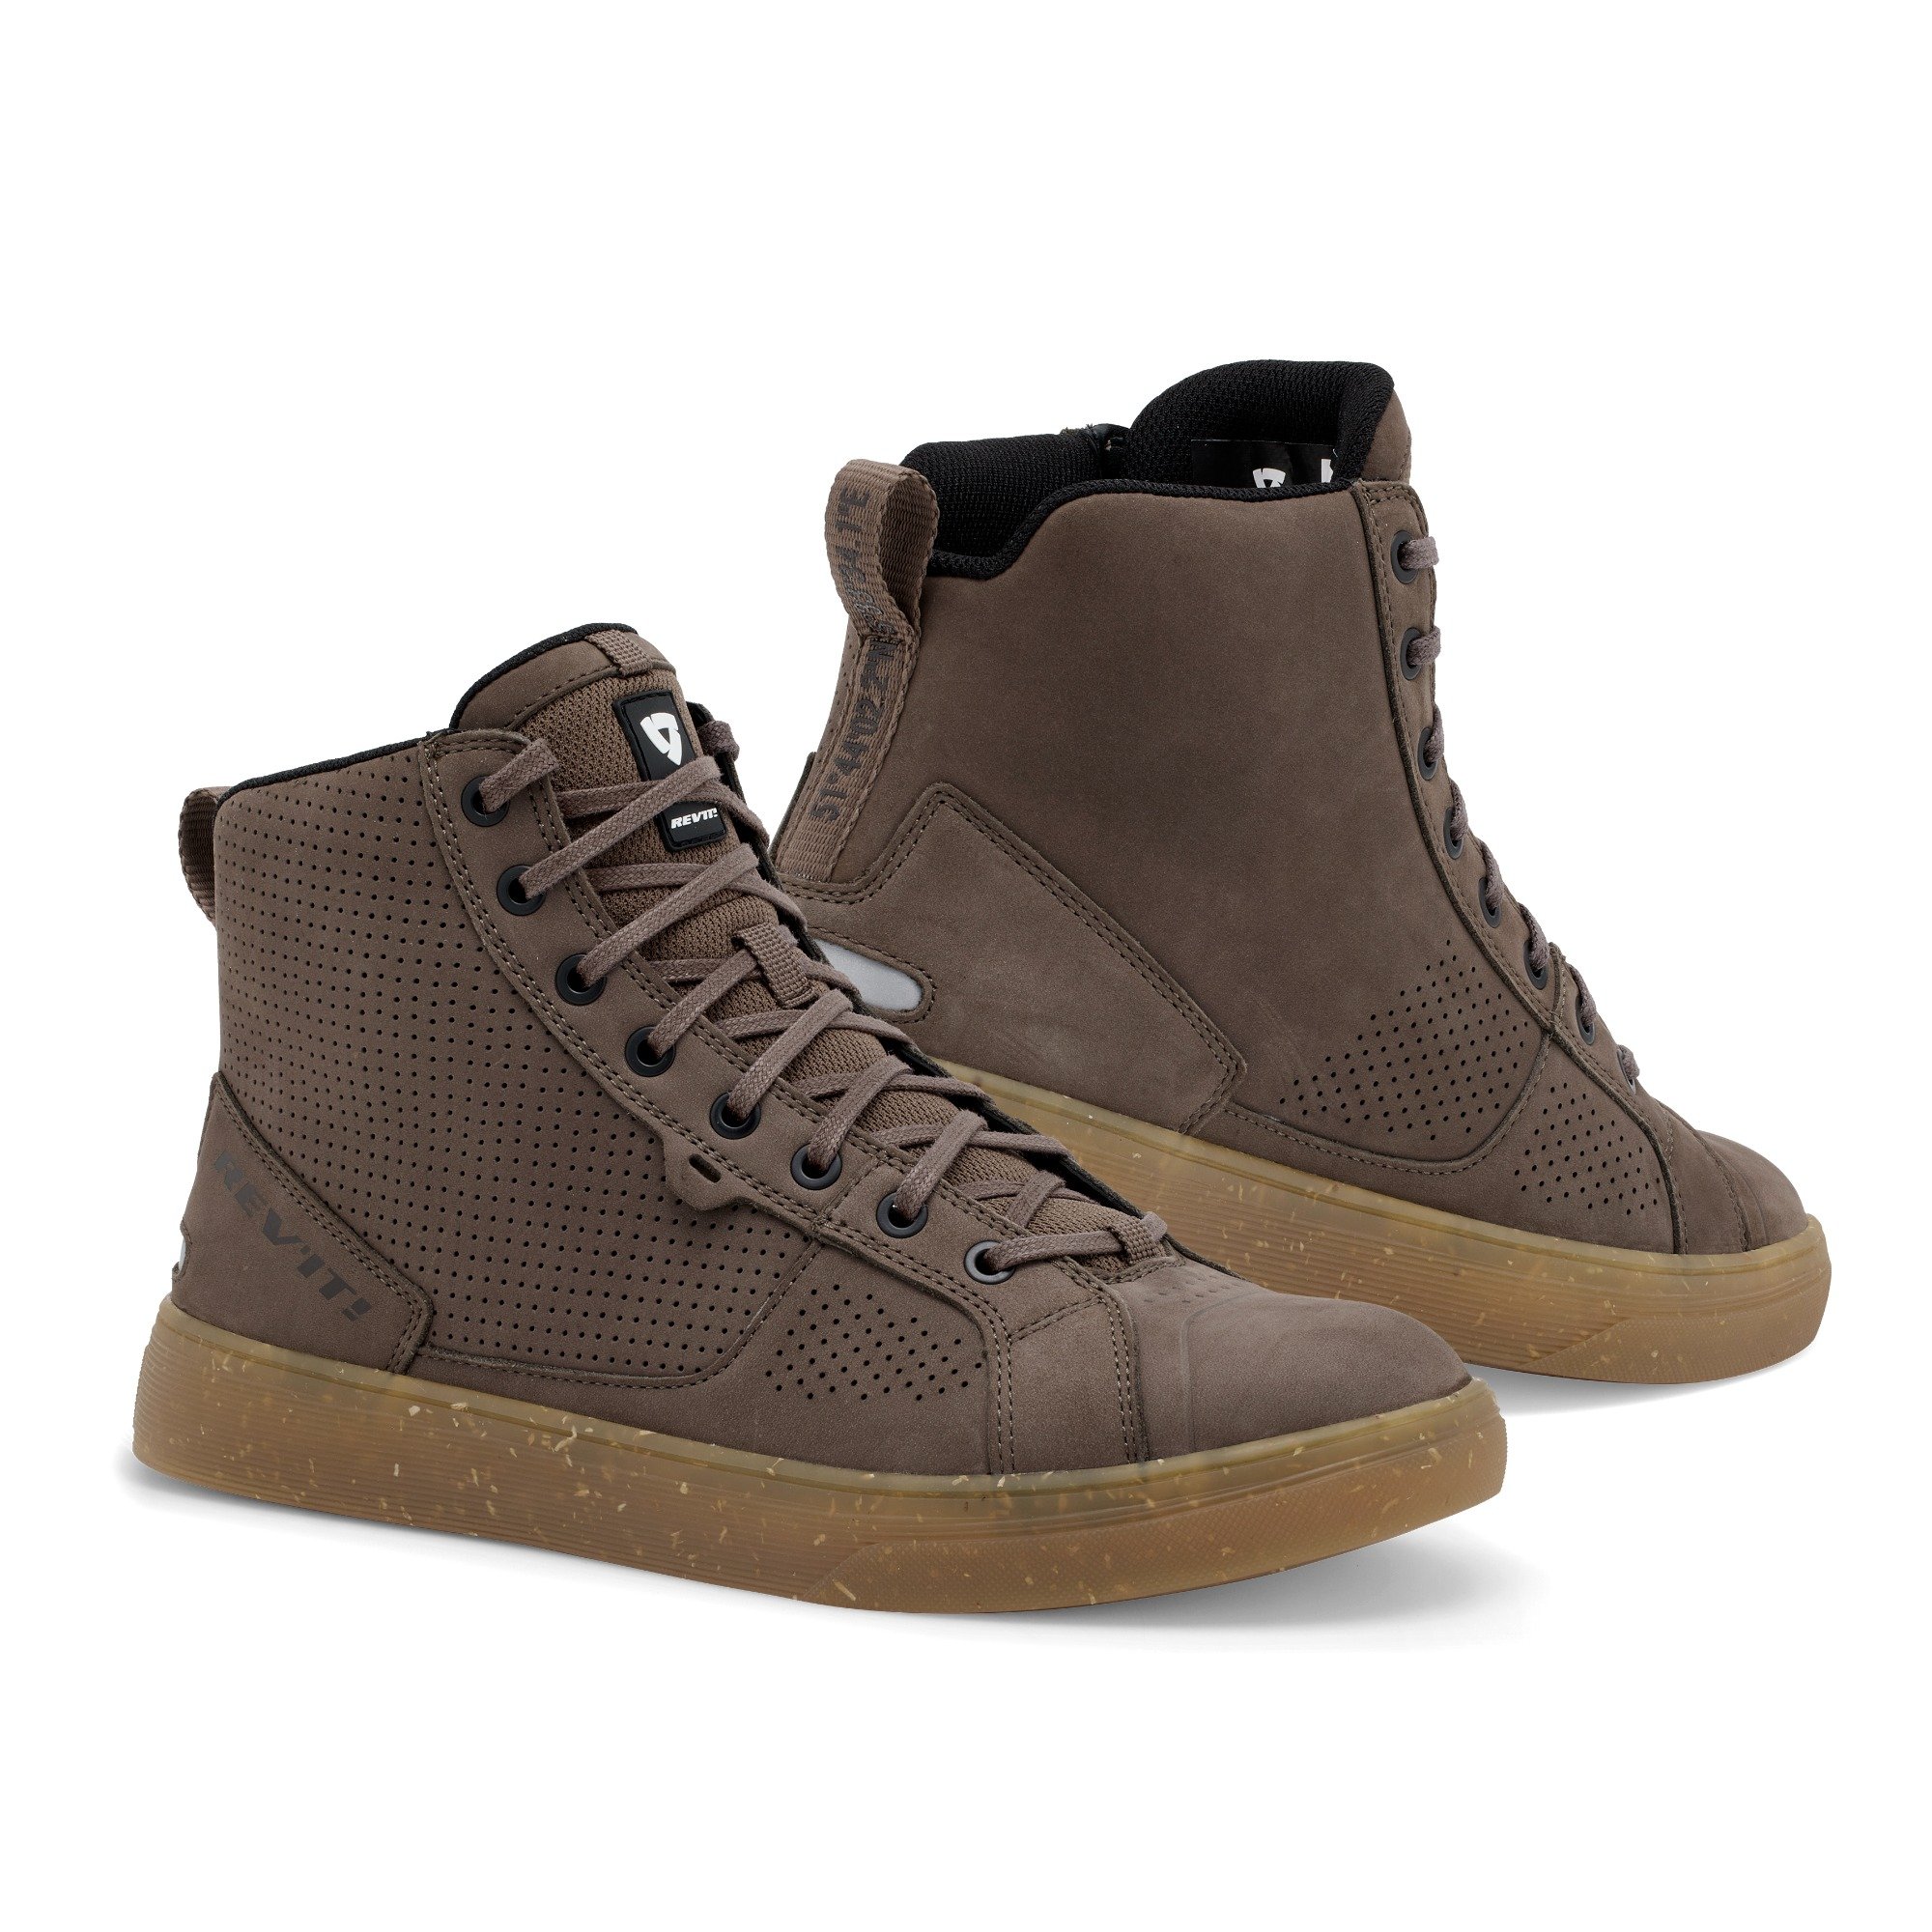 Image of EU REV'IT! Arrow Chaussures Taupe Marron Taille 42